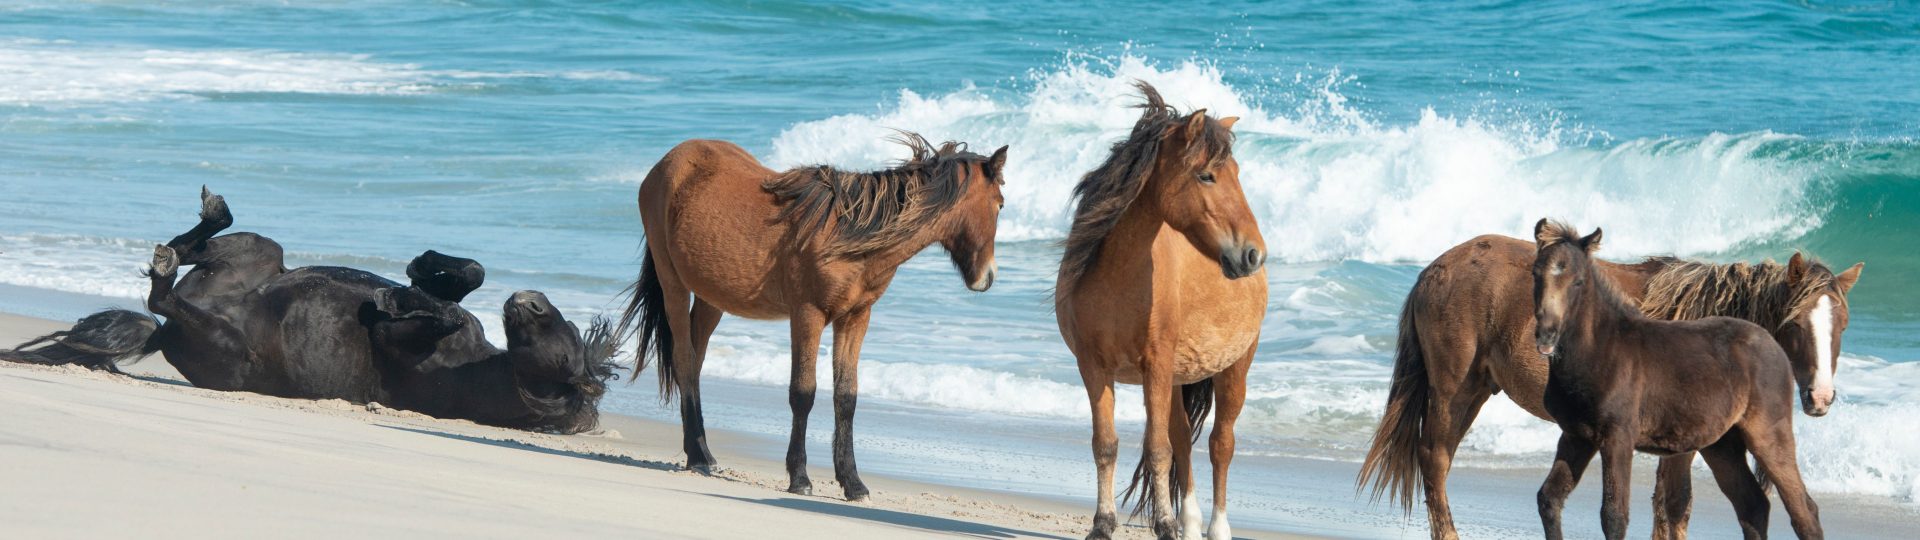 Spend three days and explore Sable Island and enjoy a day at the Spa at Fox Harb'r